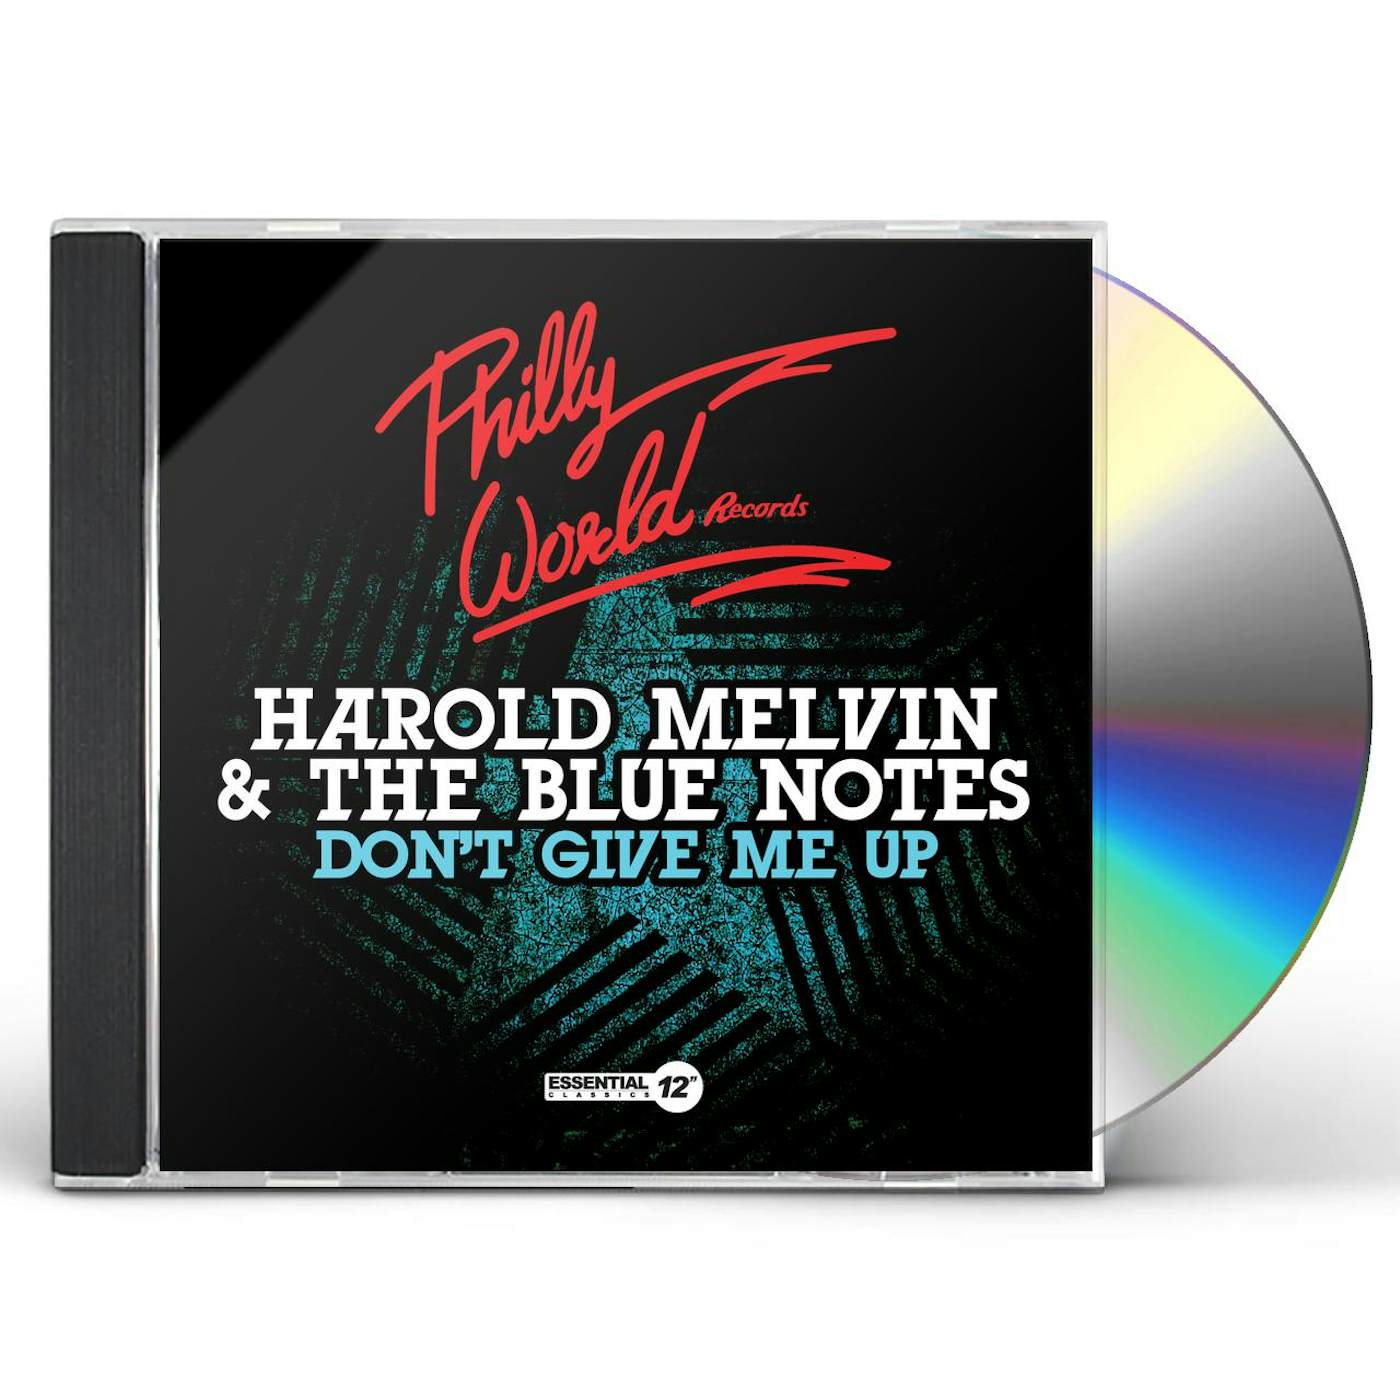 Harold Melvin & The Blue Notes DON'T GIVE ME UP CD